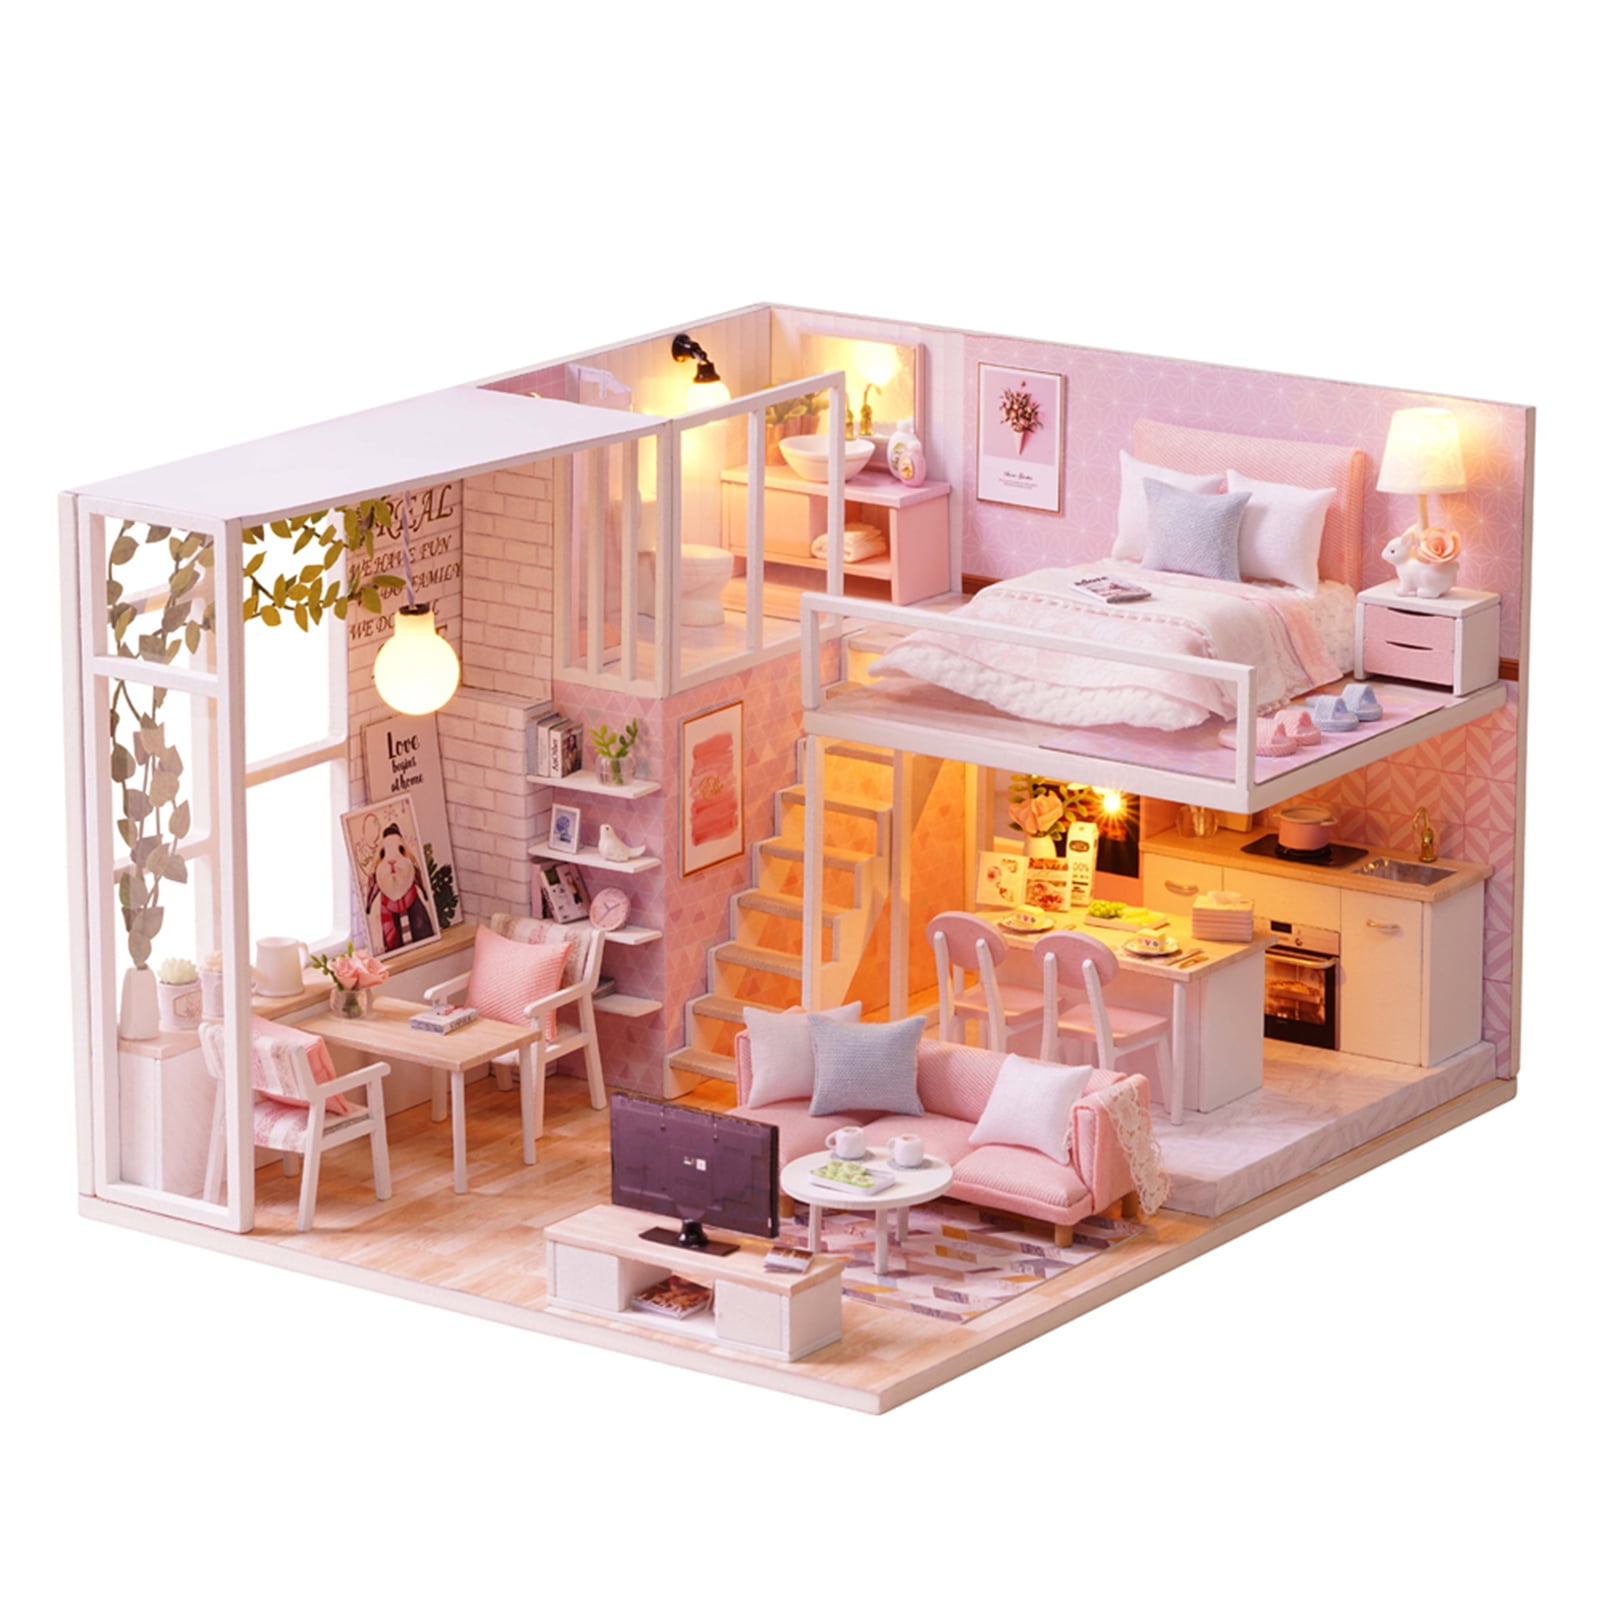 Includes Lights and Furniture Unassembled By Teddy Youth Ever Miniature Childrens Bedroom Model DIY Dollhouse Project Kit